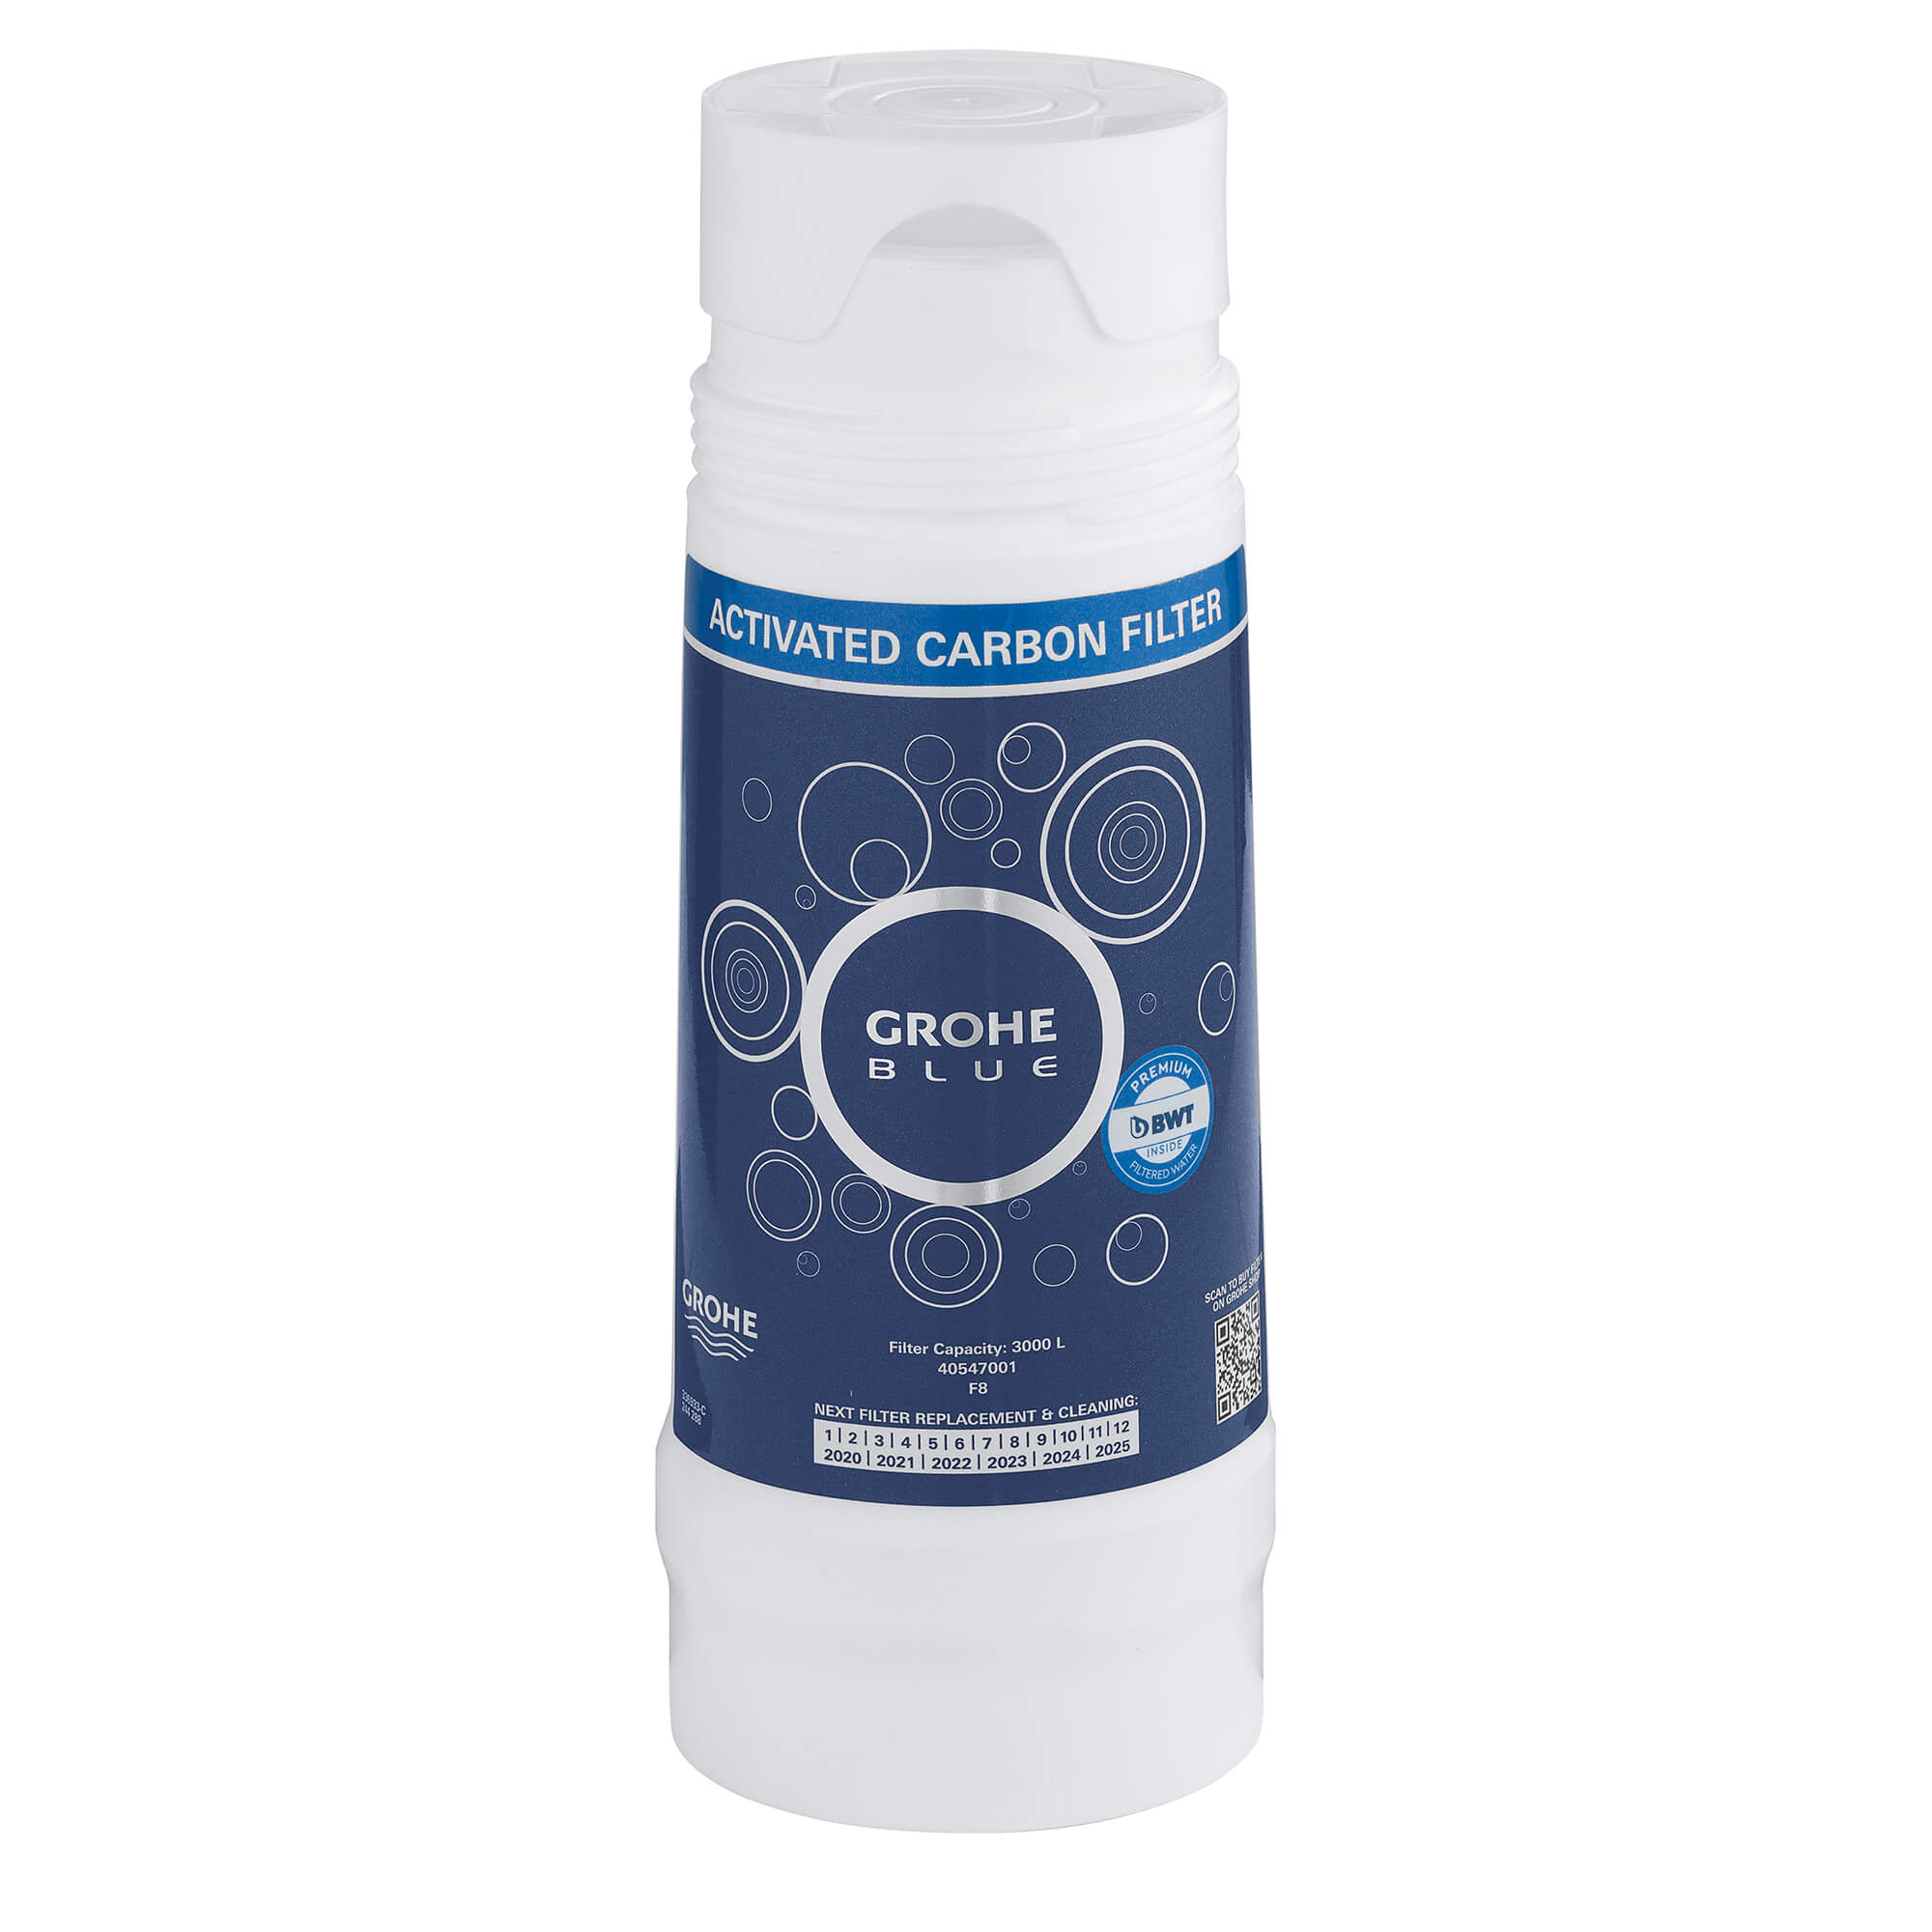 Grohe Blue Filter Carbon Filter For Low Water Hardness